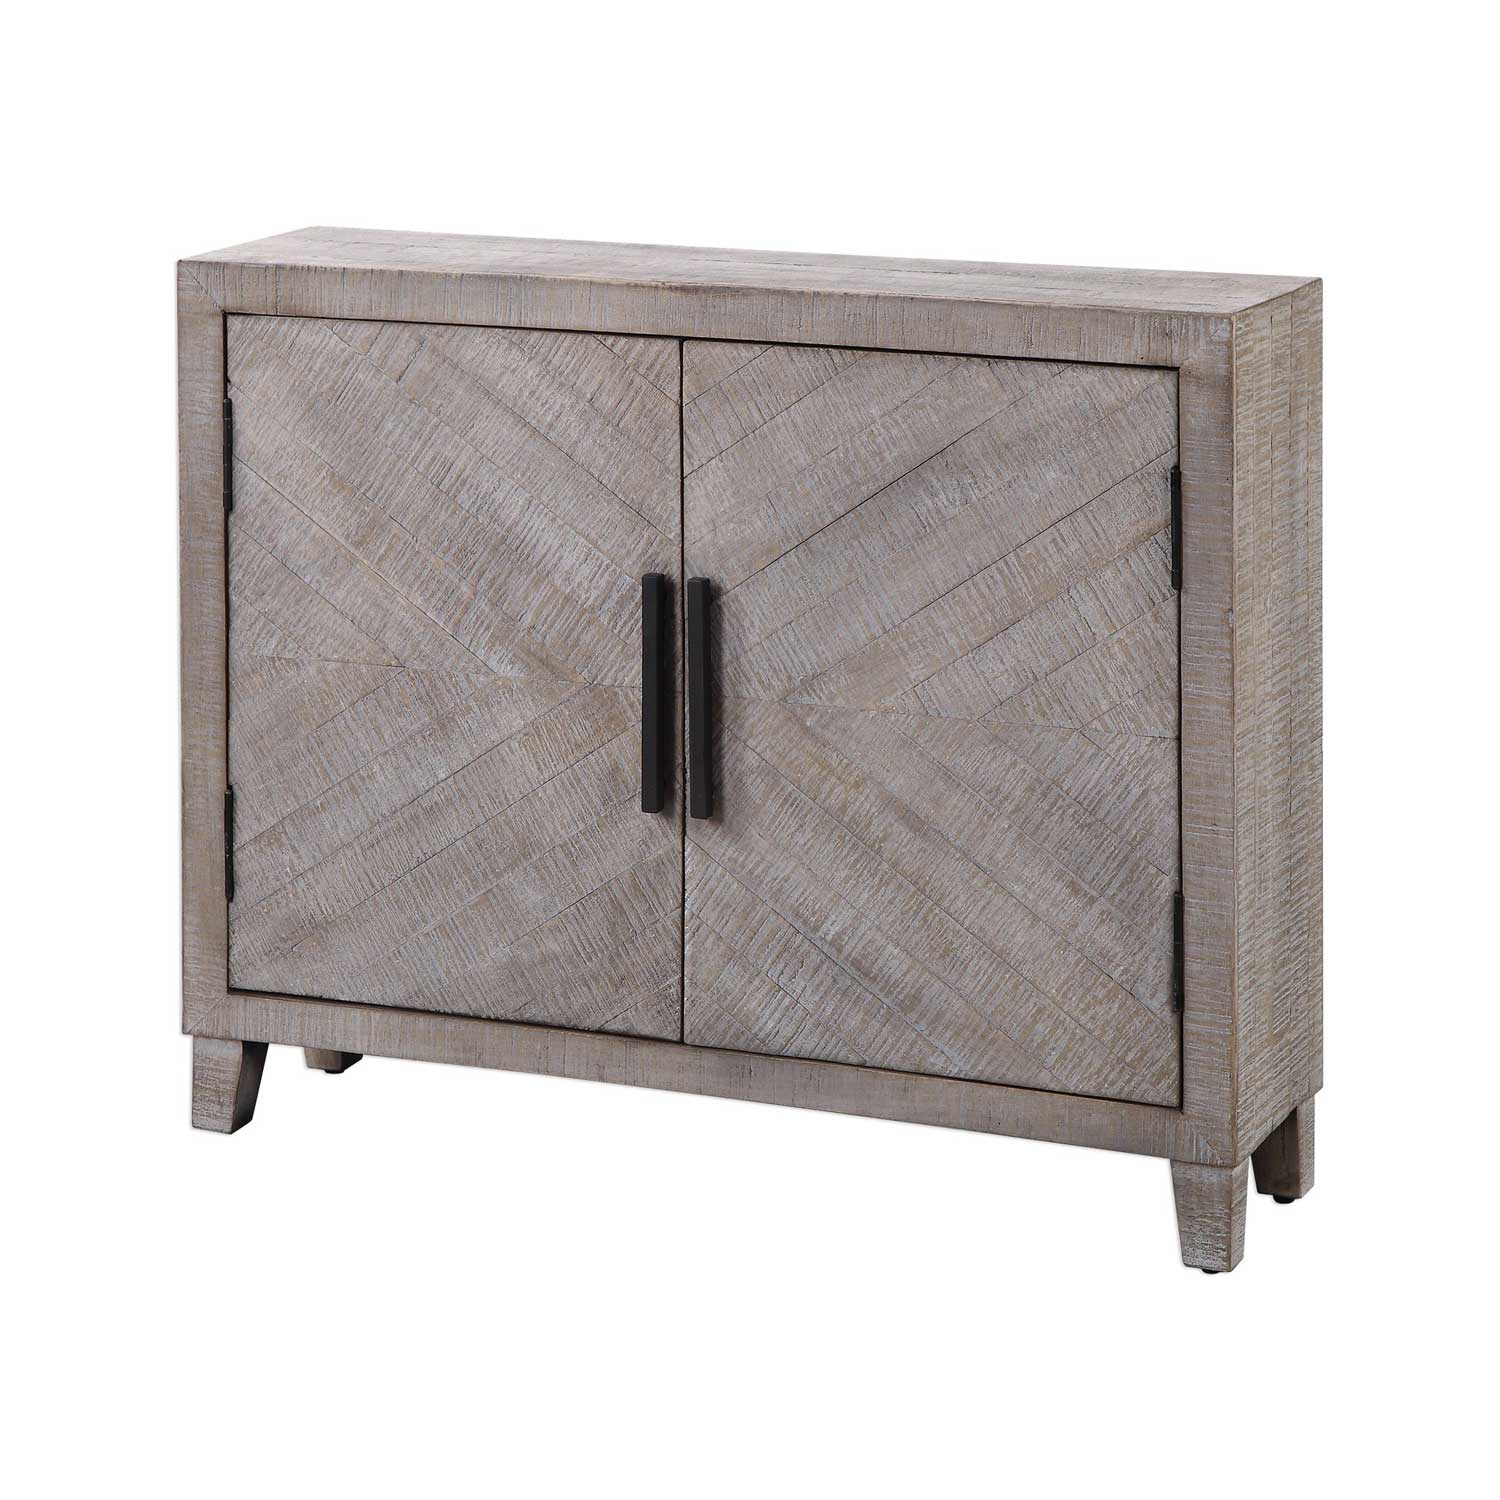 Uttermost Adalind Accent Cabinet - White Washed